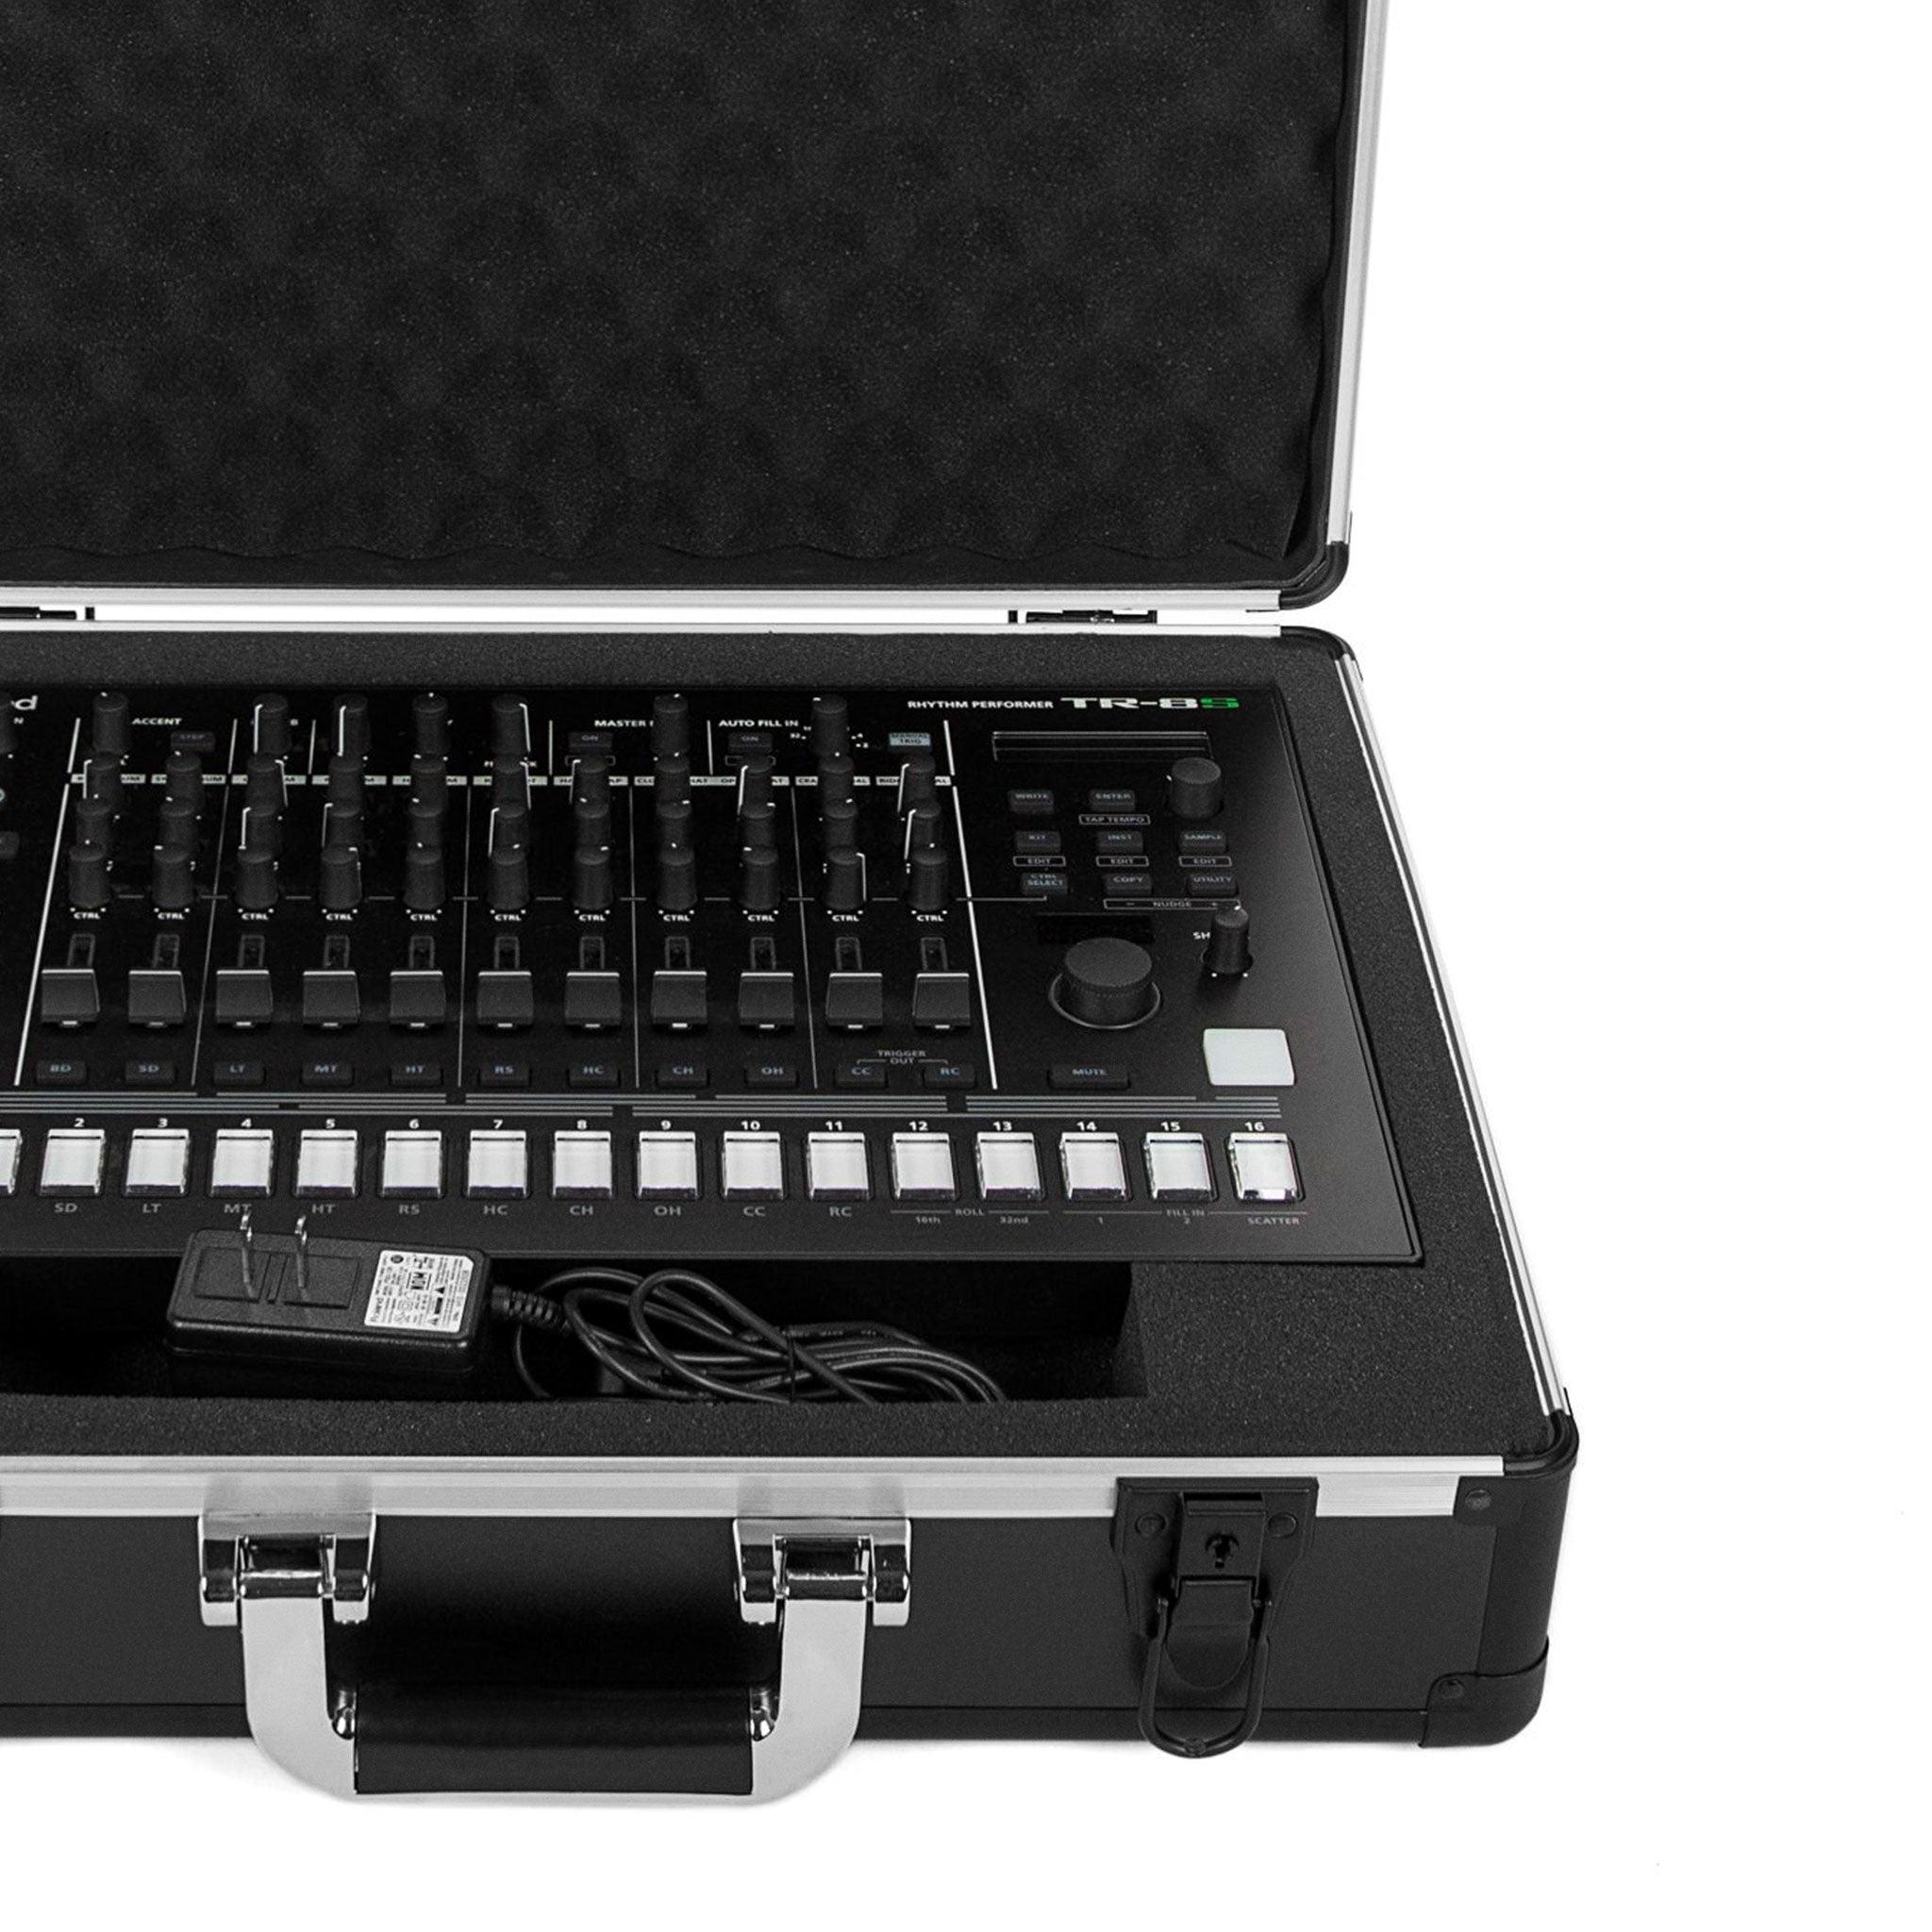 UNISON Case For The Roland TR-8S, TR8 or MC-707